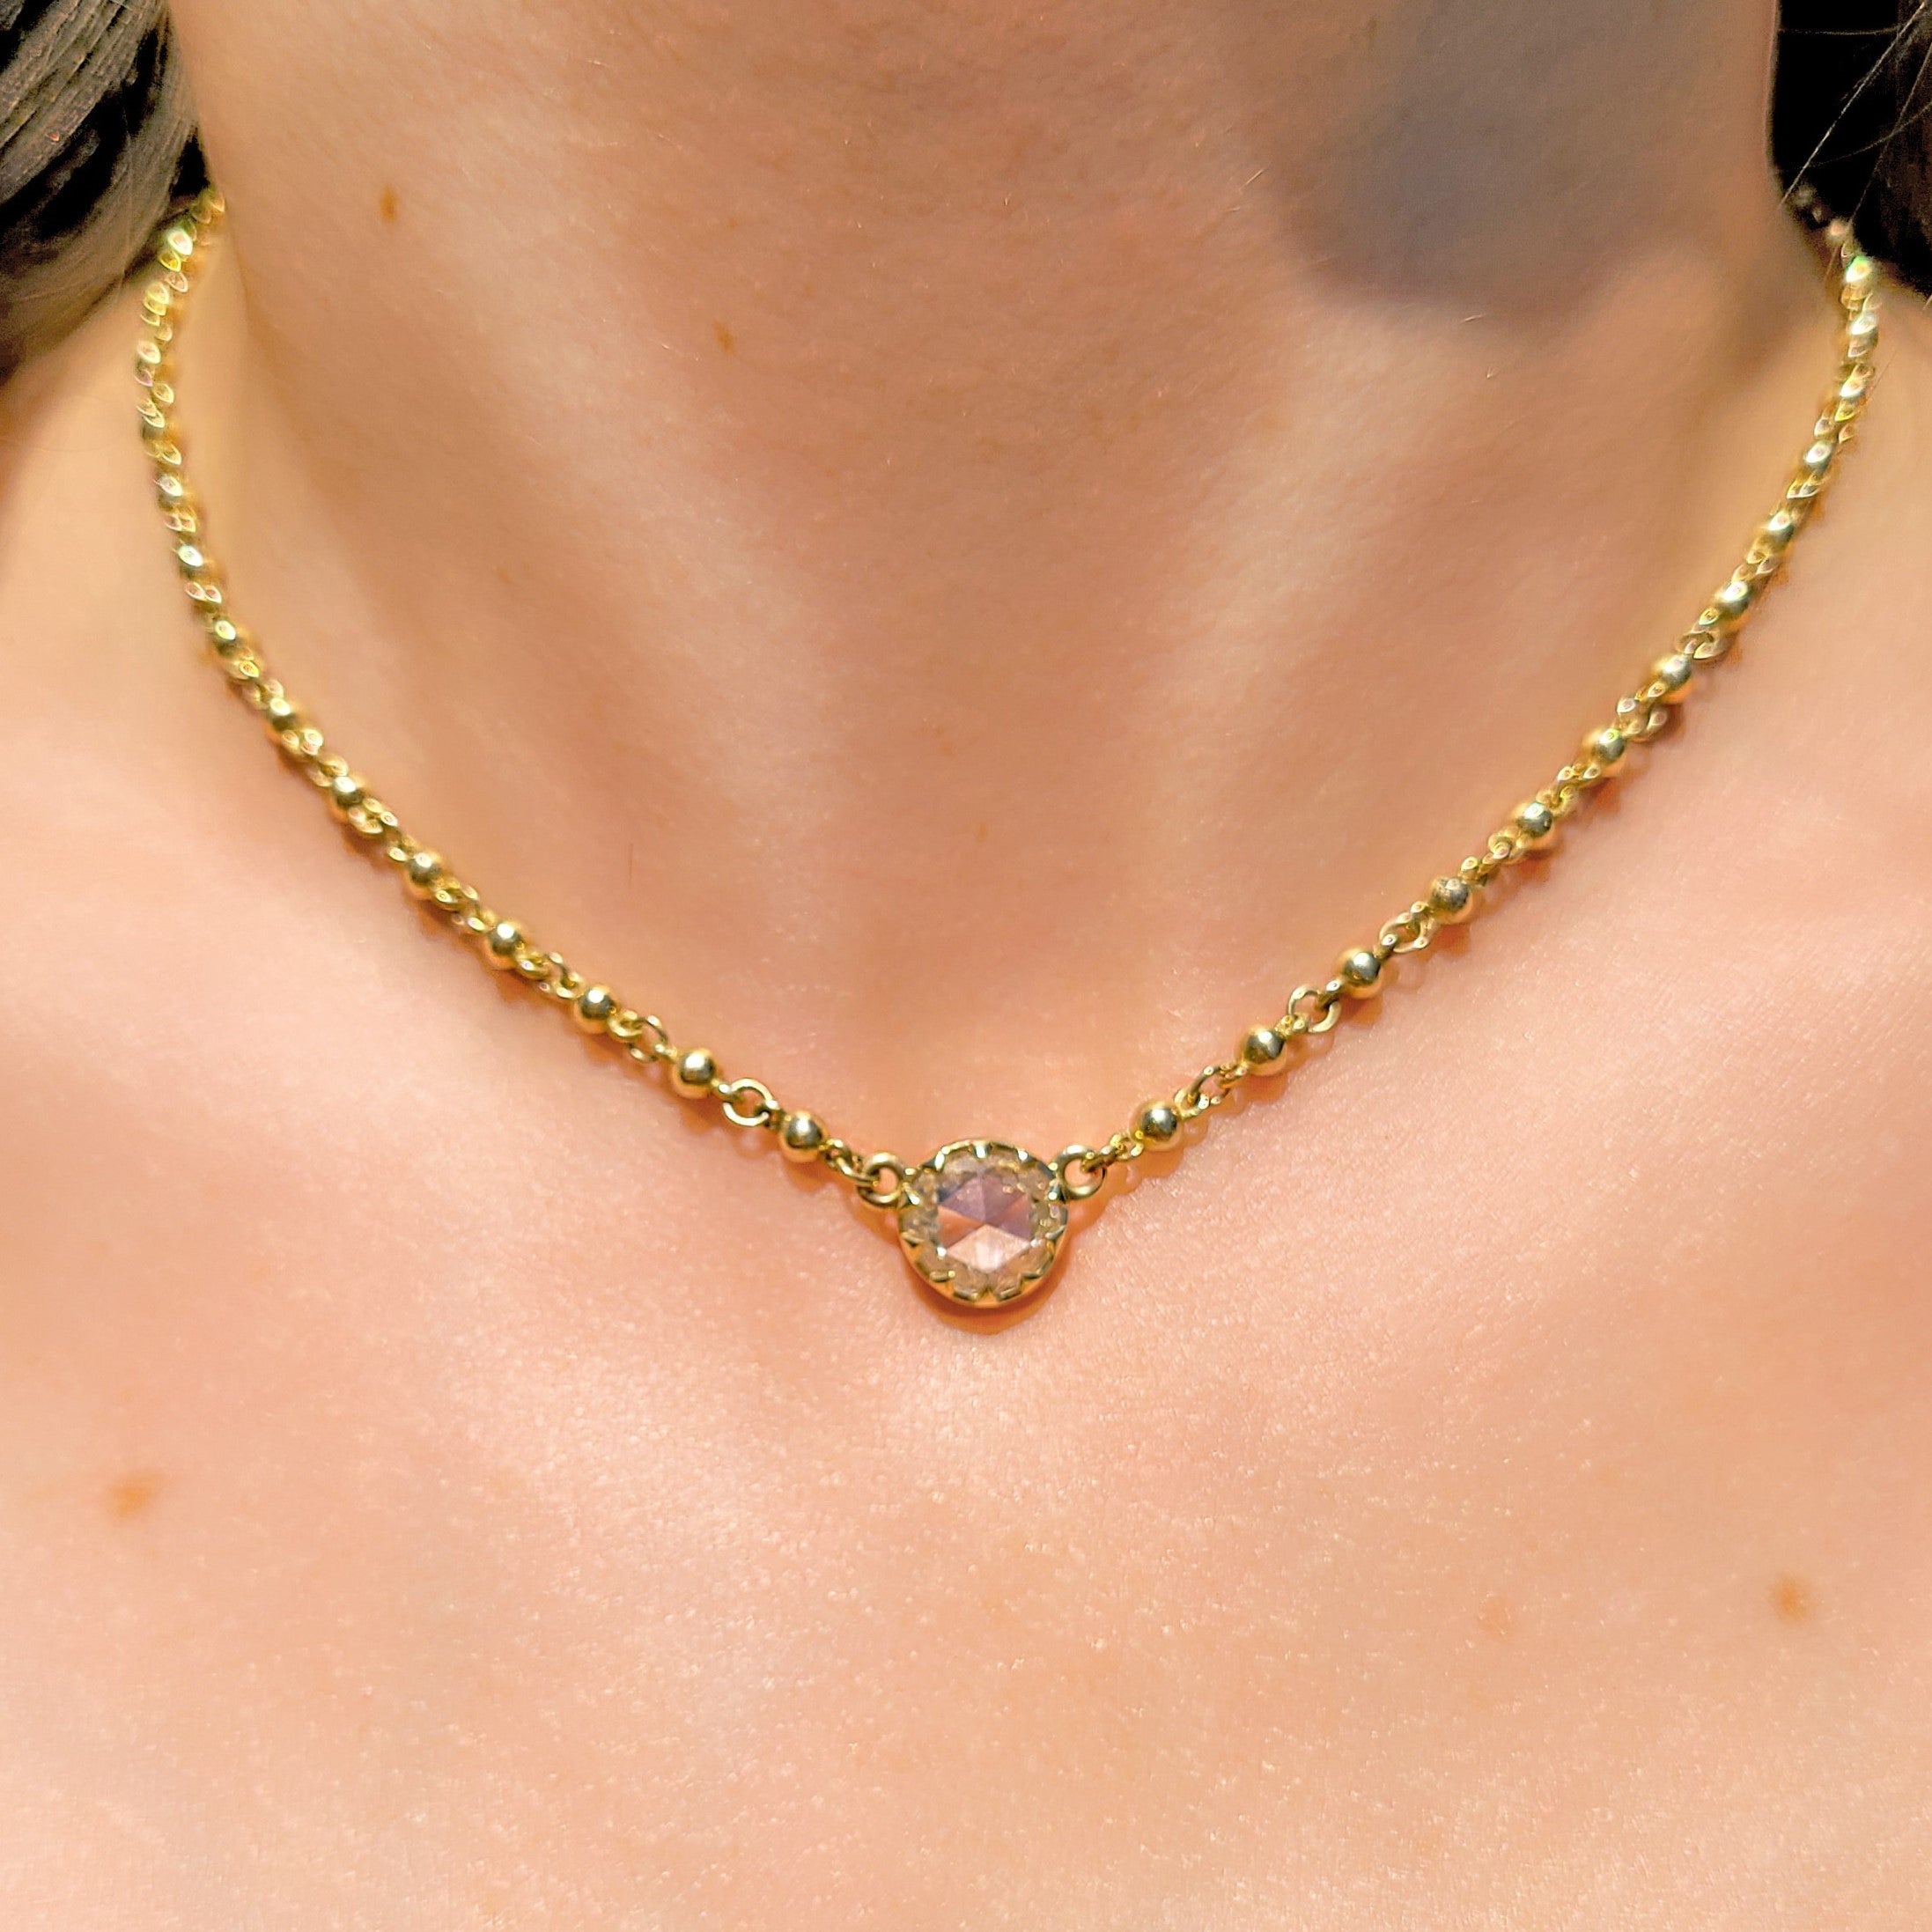 SINGLE STONE ROSALINA NECKLACE featuring 2.00ct L/I2 GIA certified rose cut diamond prong set on a handcrafted 18K yellow gold necklace. This vintage diamond's cut dates back to the 18th century. Necklace measures 17".